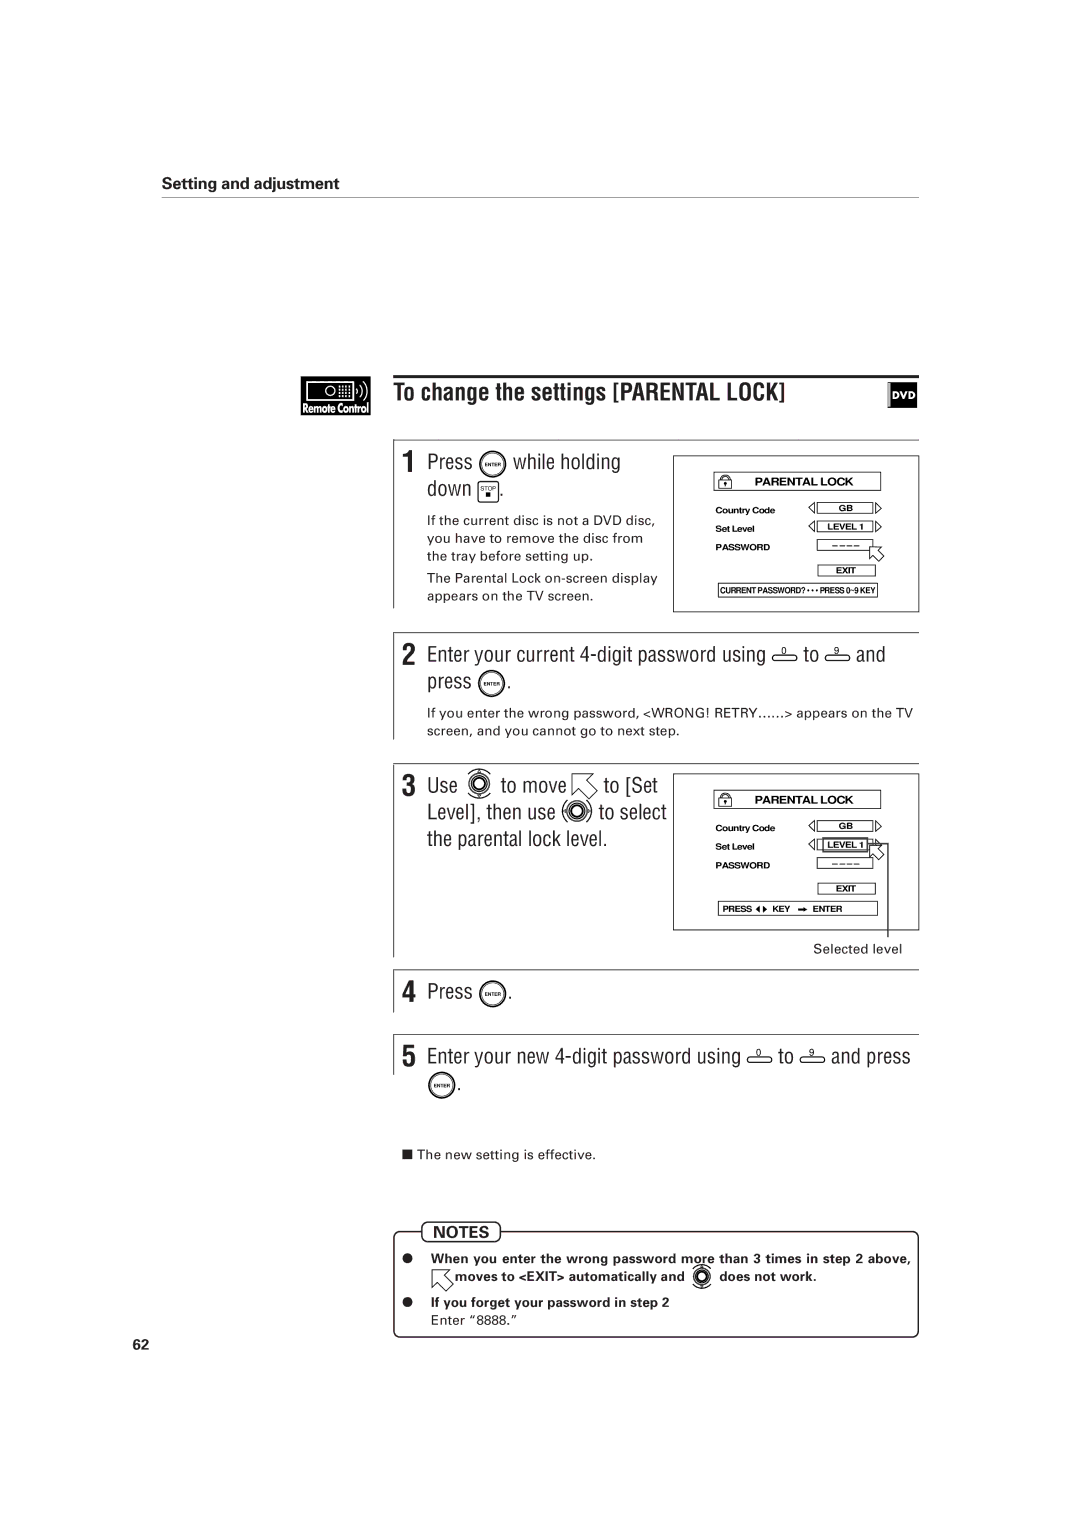 JVC XV-D701BK manual To change the settings Parental Lock, Use to move to Set 